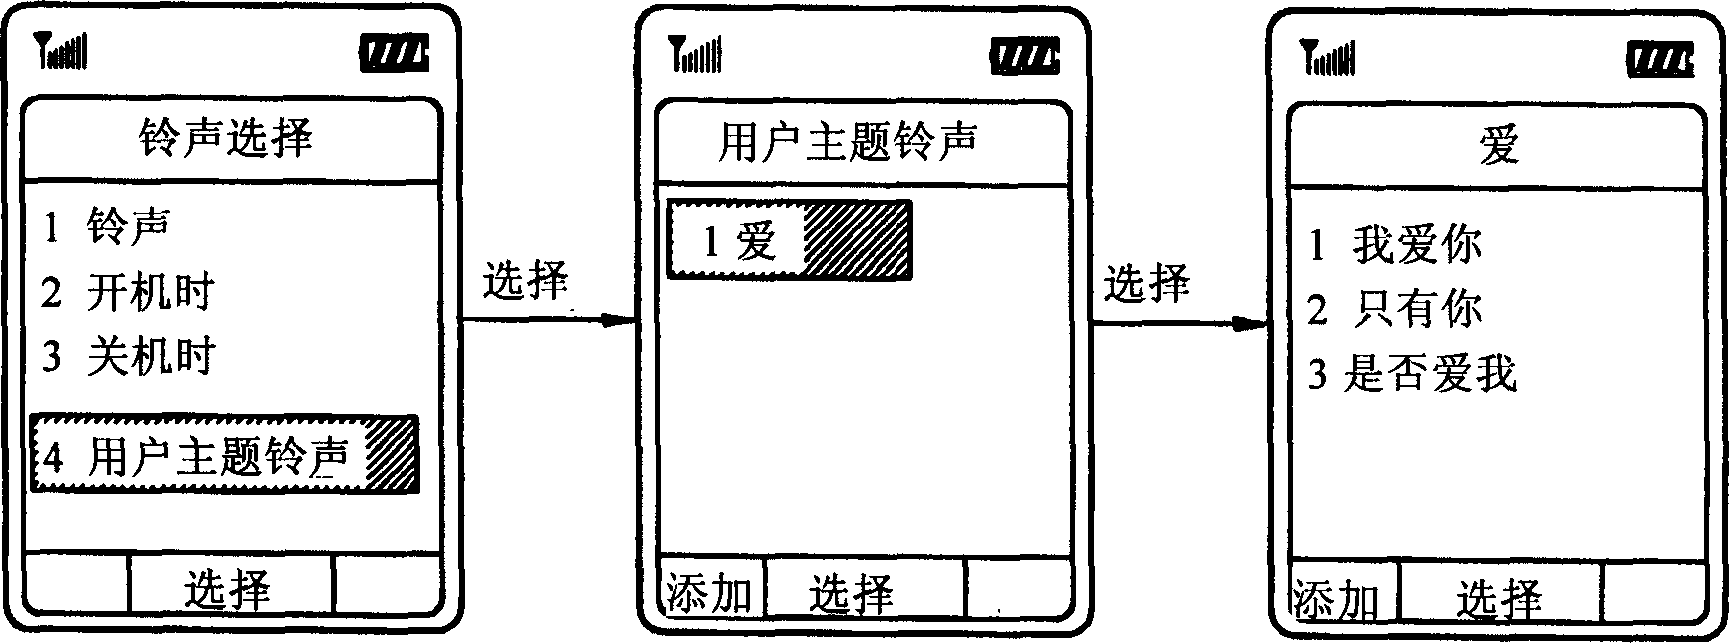 Ringing outputting method for mobile telephone